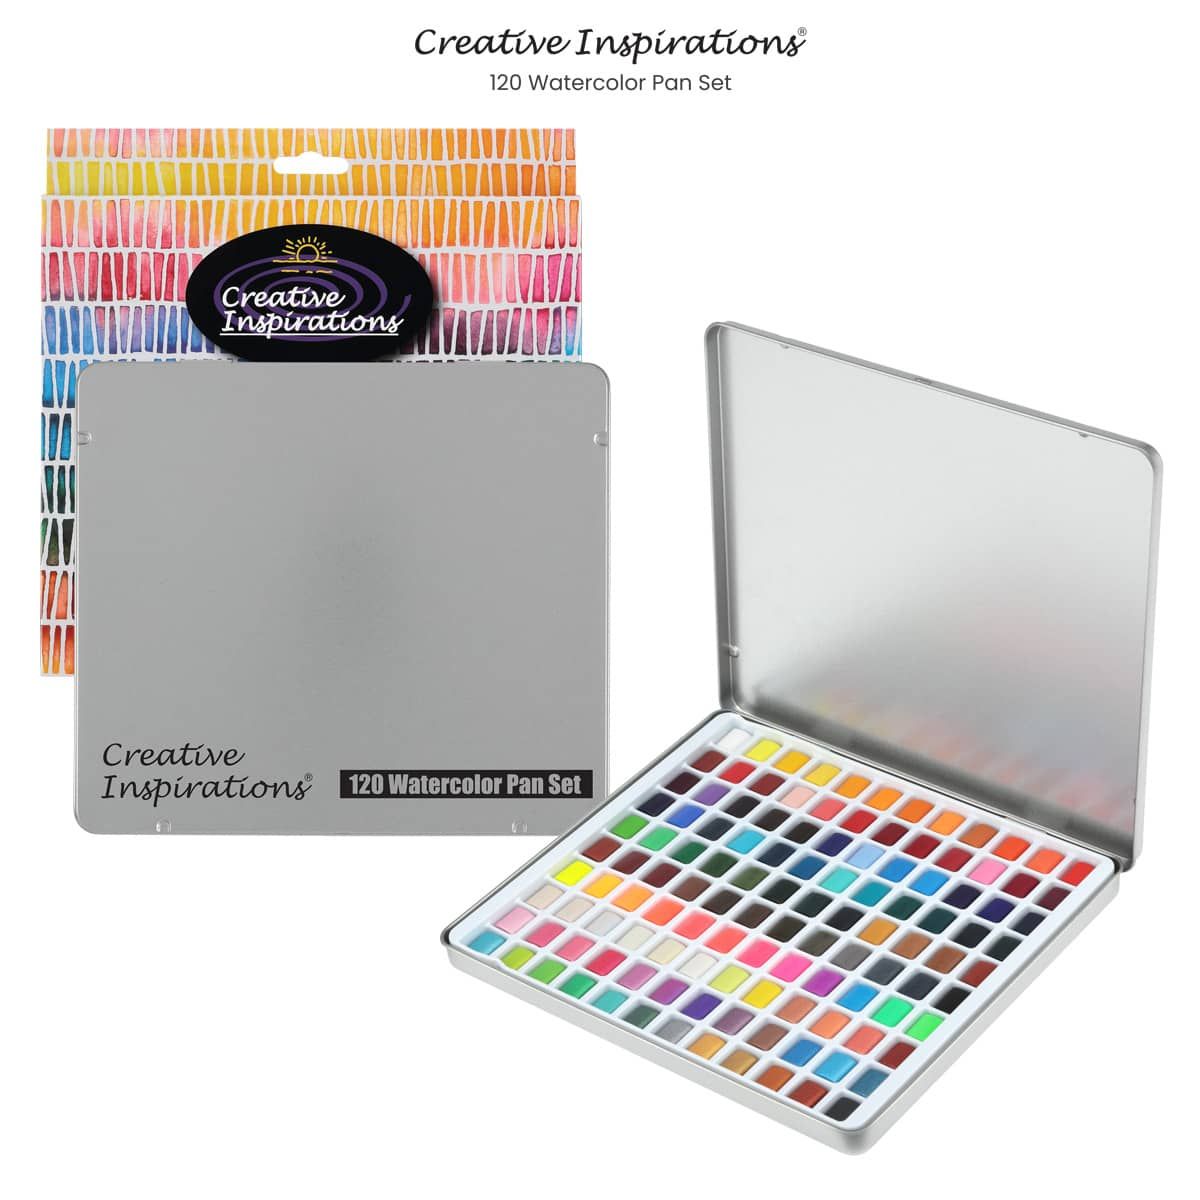 120 brilliant watercolors at an affordable price